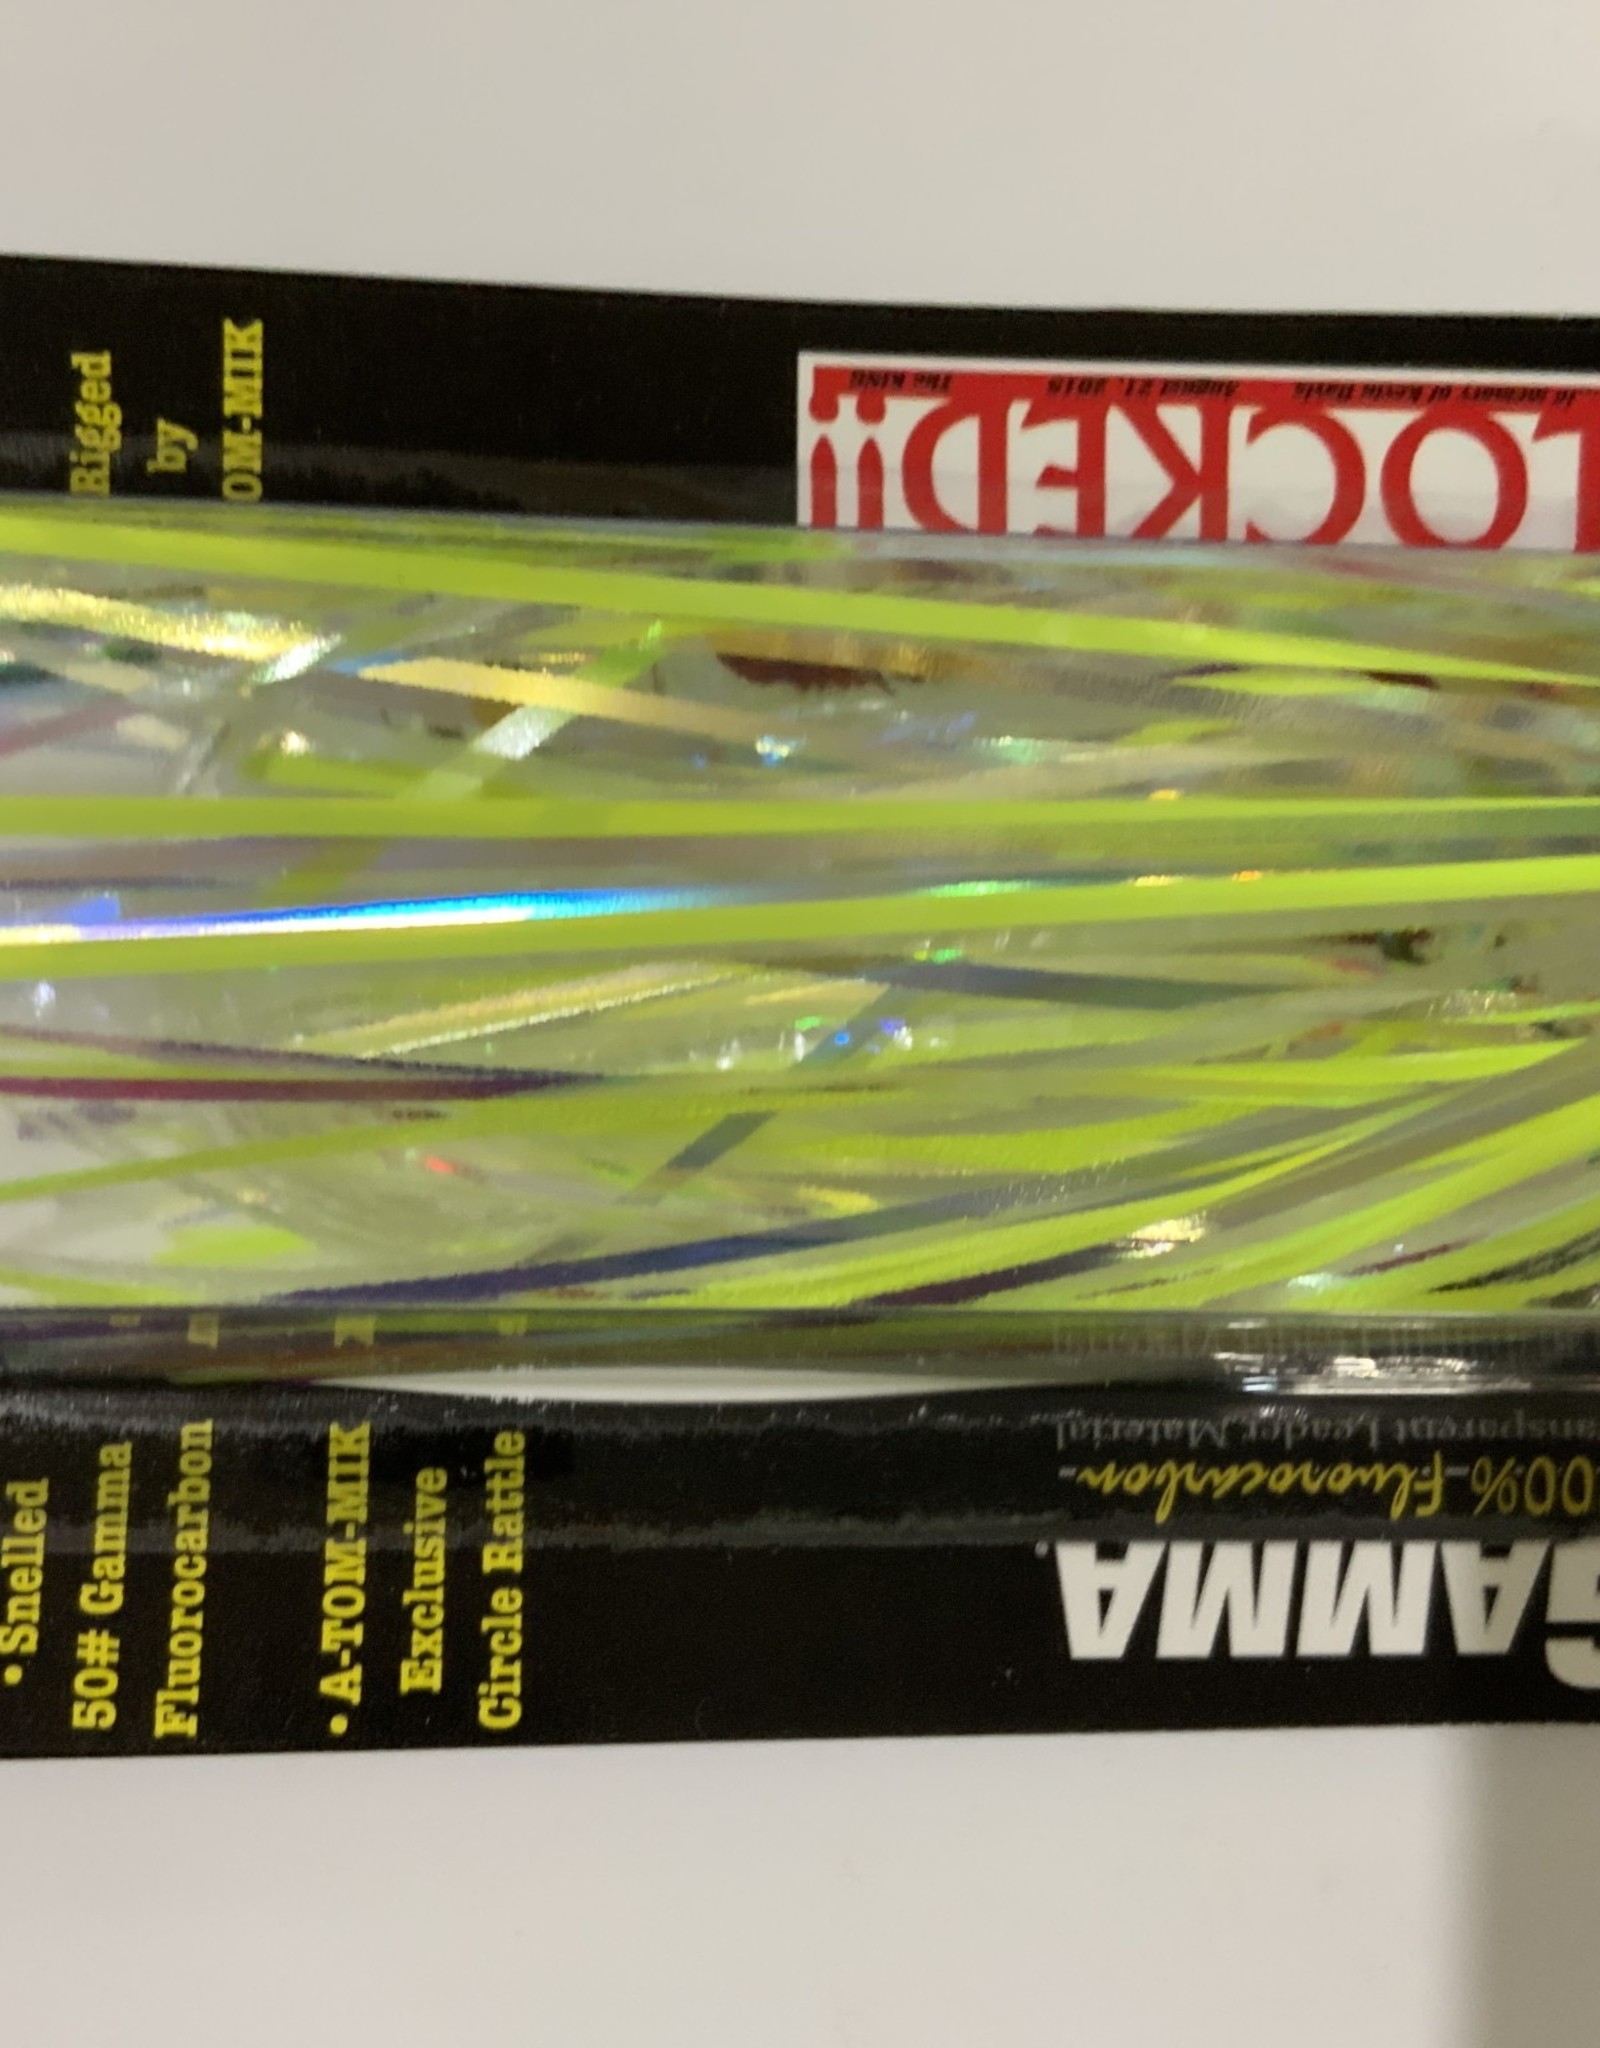 A-TOM-MIK MFG. A-TOM-MIK TOURN FLY RIGGED T-140 FISH ON GLOW